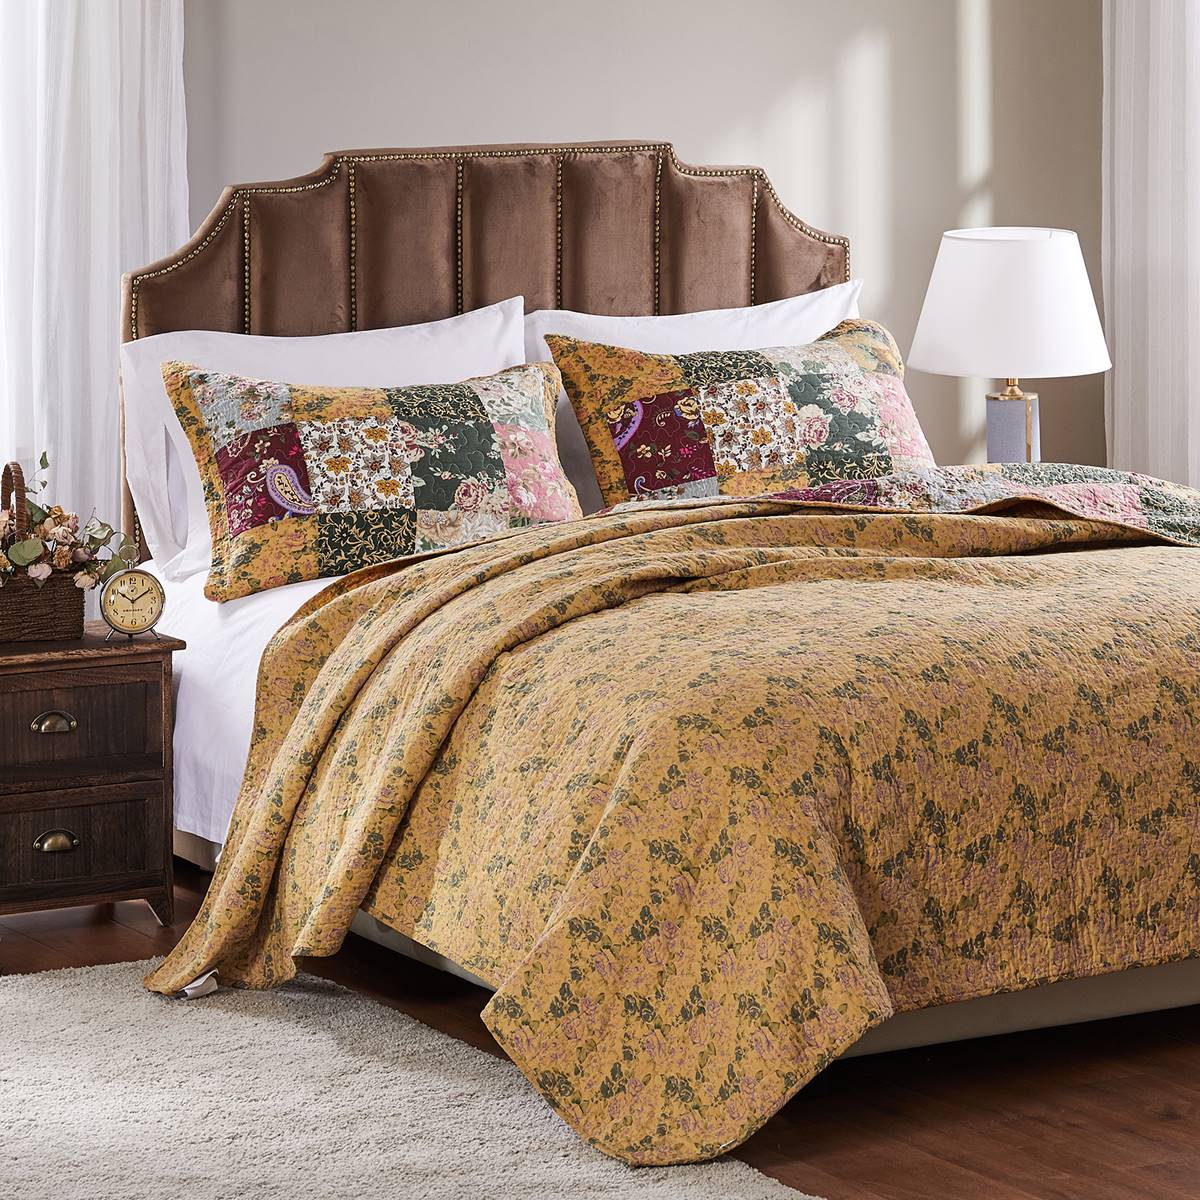 Greenland Home Fashions(tm) Antique Chic Patch Quilt Set W/ Pillows